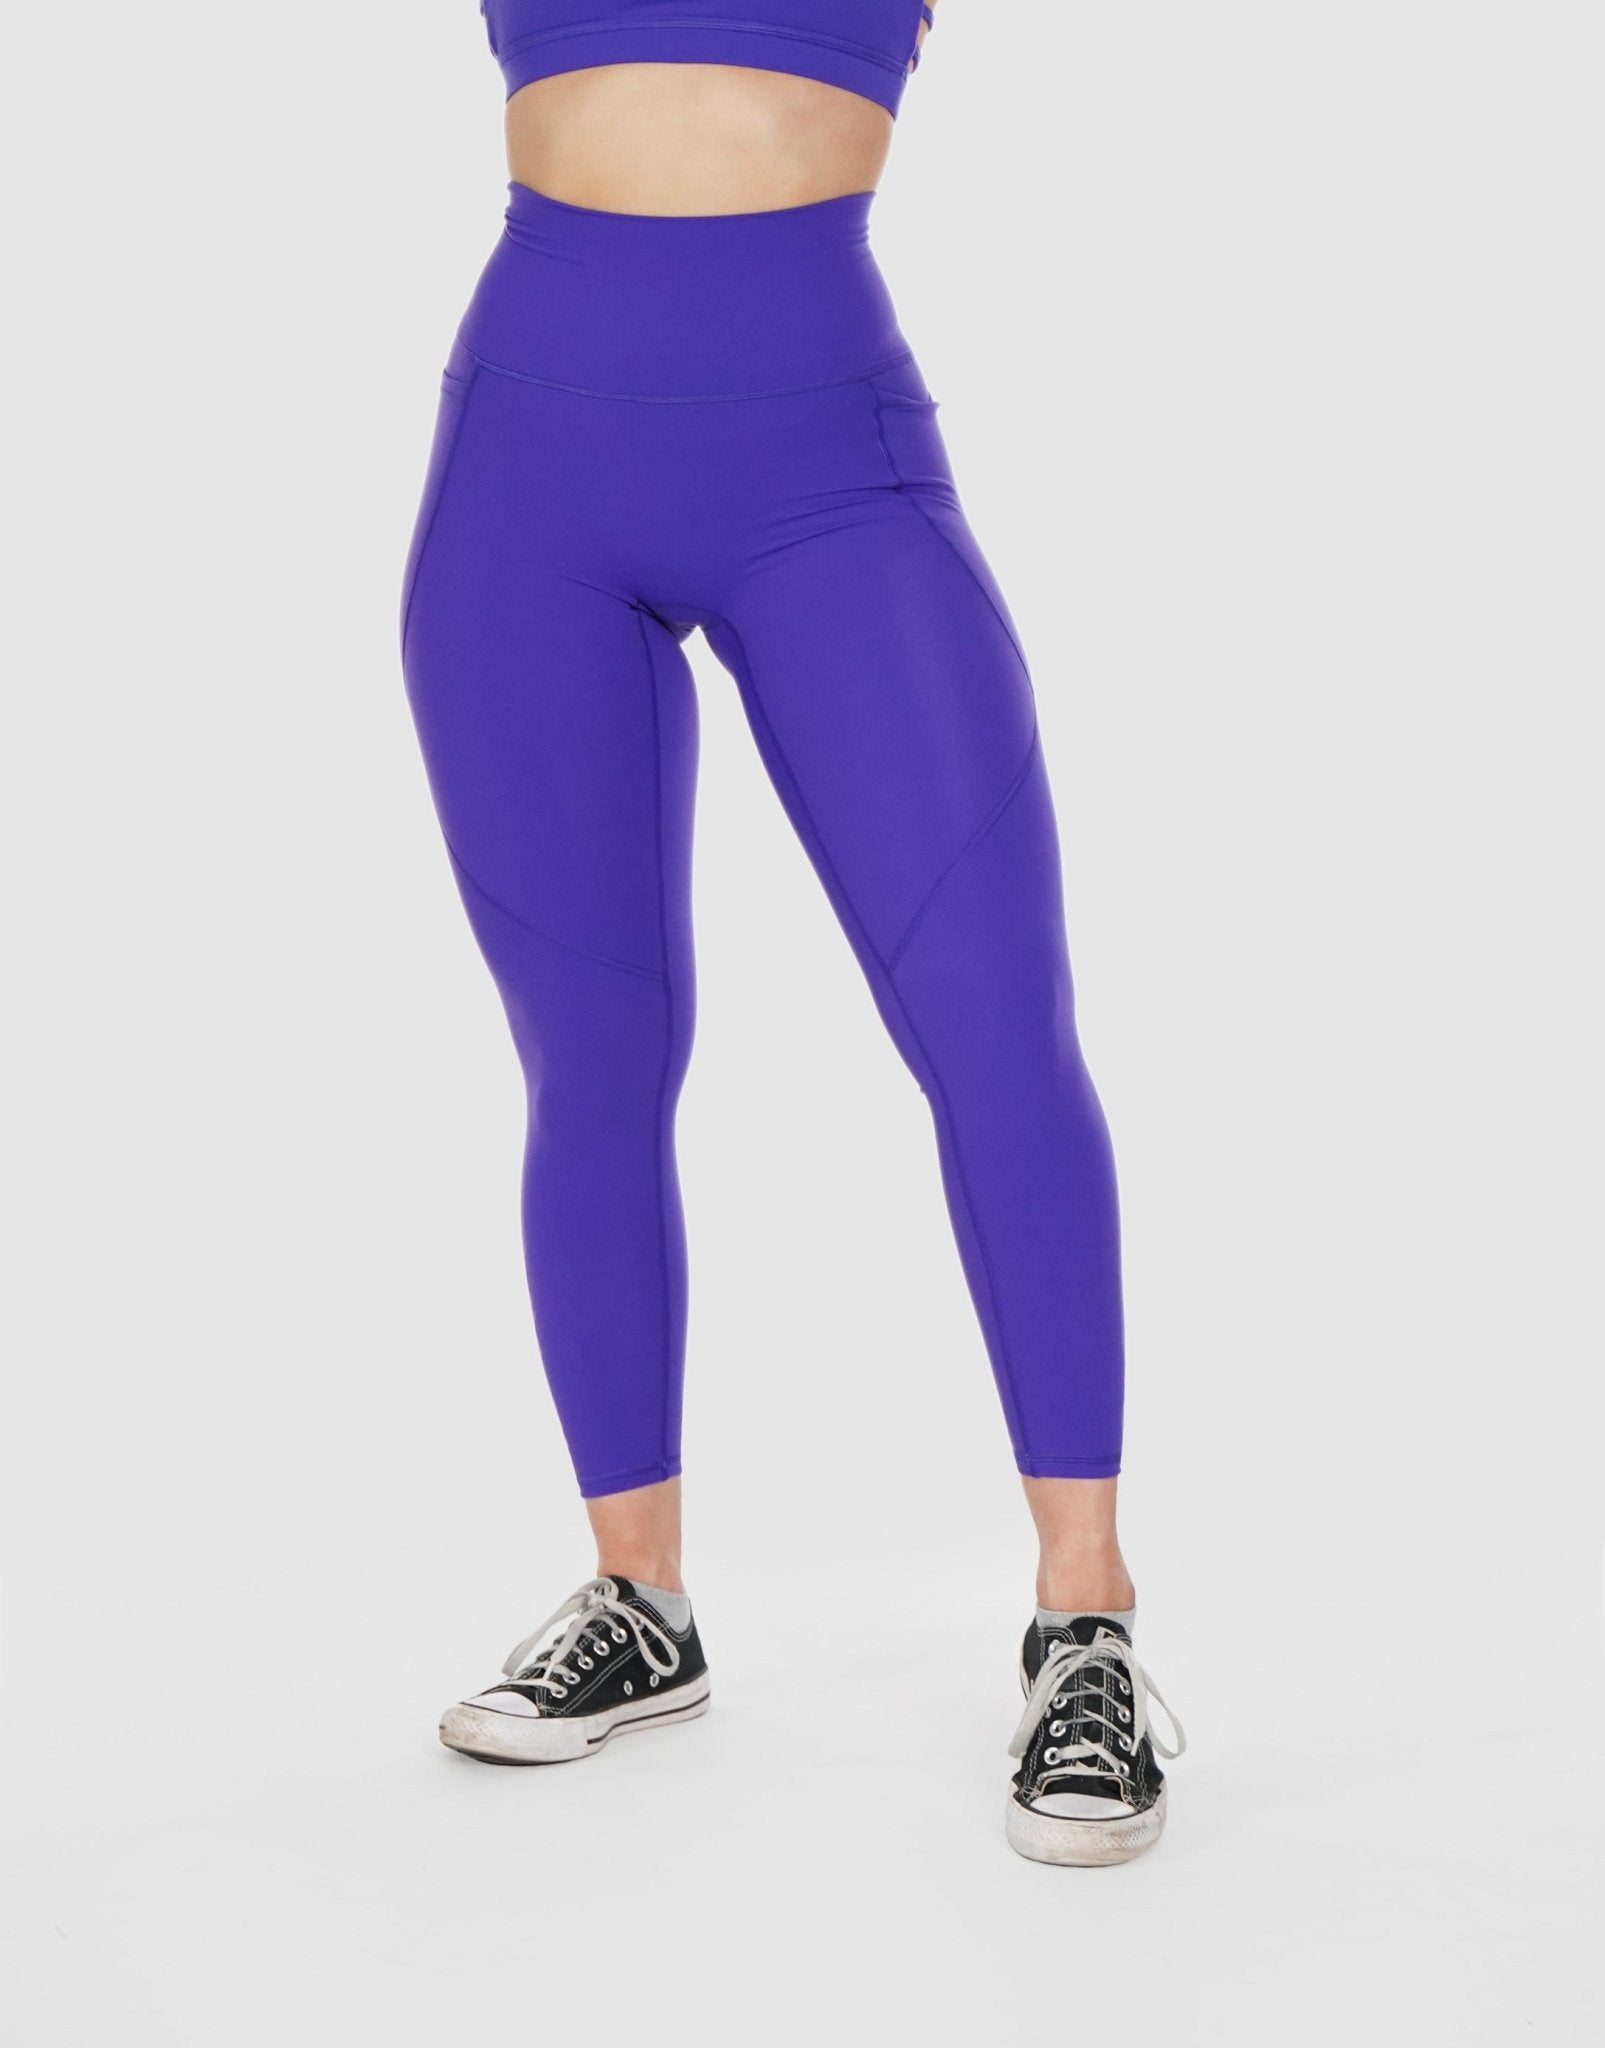 Moneyball Sportswear - Hottest leggings out - grab a pair today